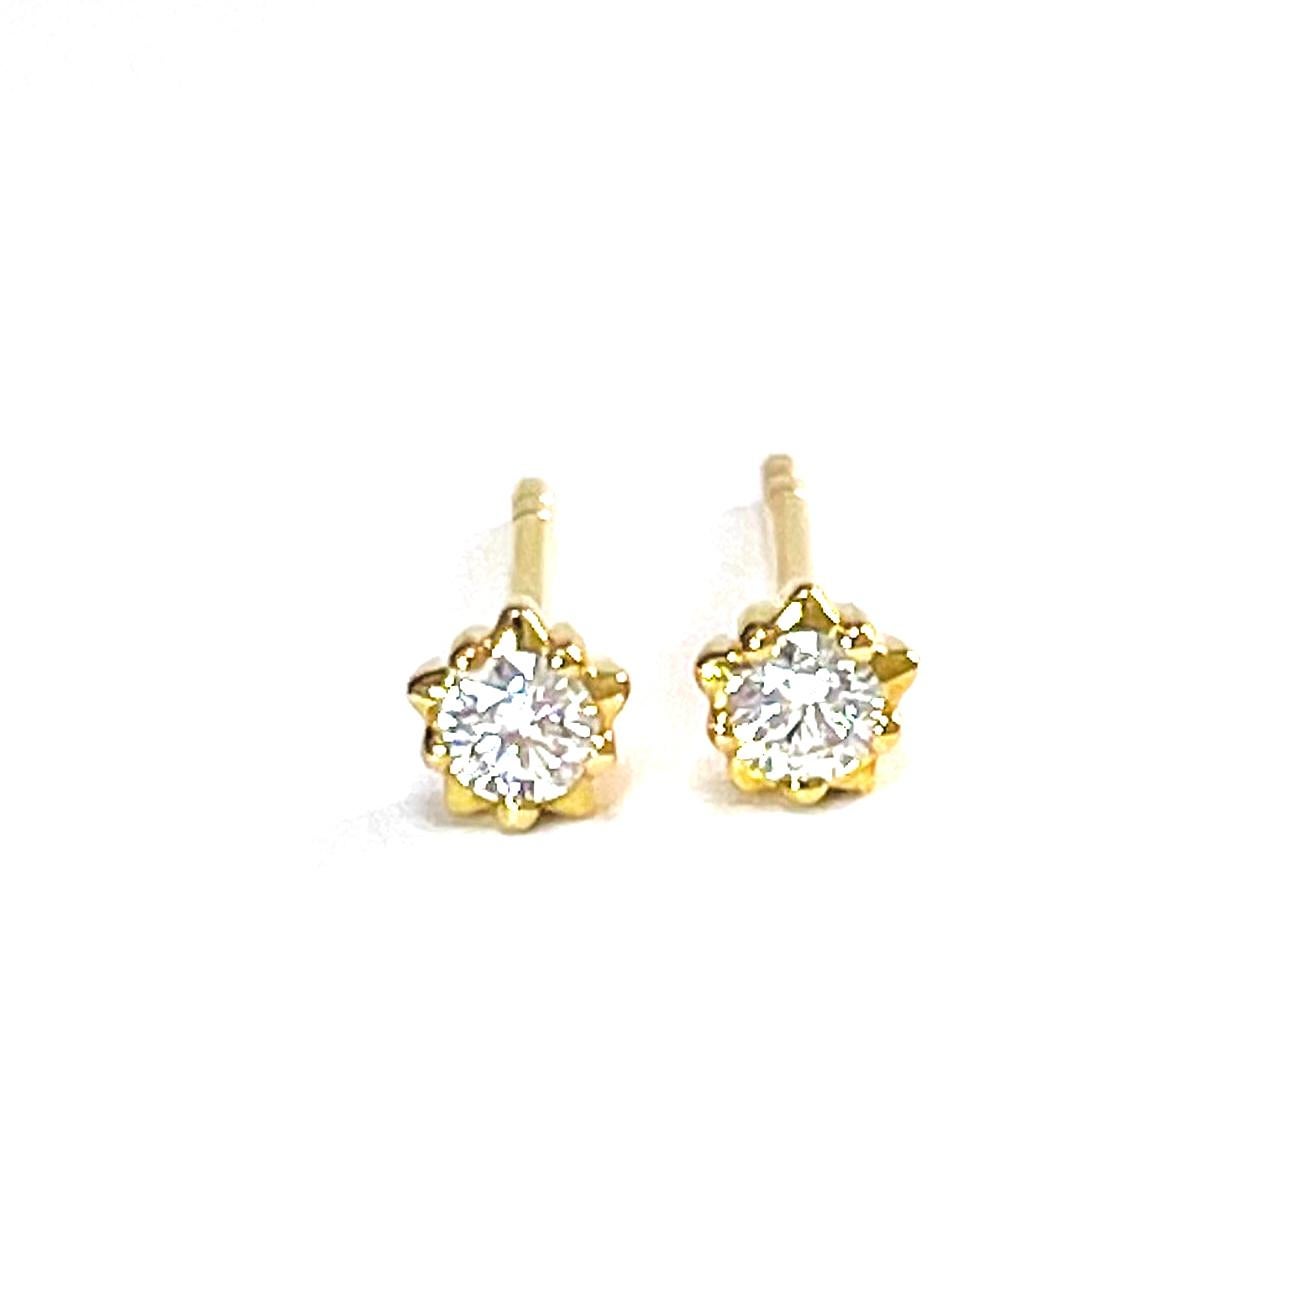 Prepare to be captivated by these exceptional diamond stud earrings that go beyond ordinary. With their innovative design, these earrings offer a remarkable feature - removable jackets, providing you with two distinct looks in a single pair. The